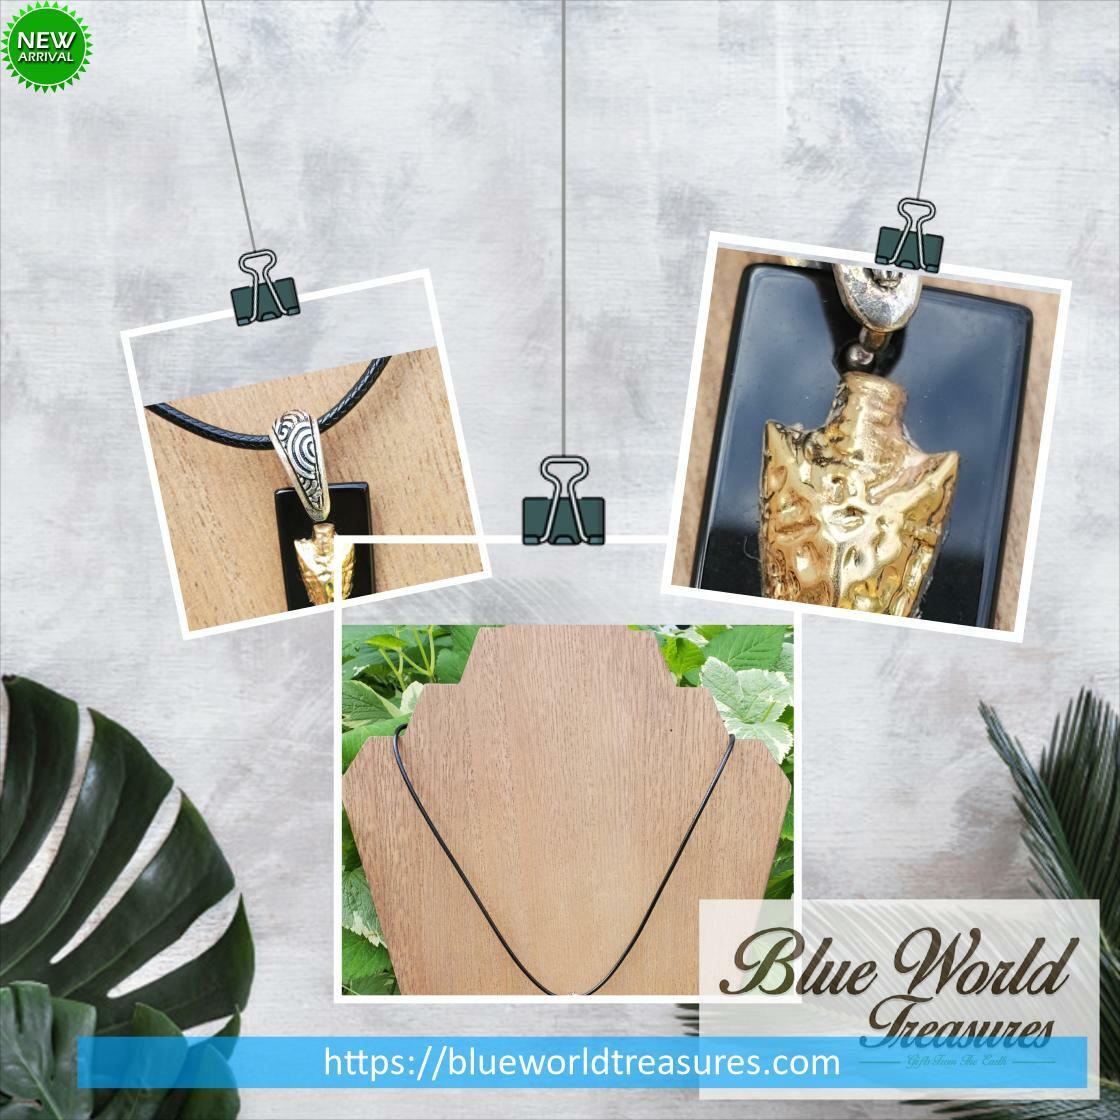 Hot Summer Looks! 🔥🔥🔥 Unisex Arrowhead Necklace ~ 14k Gold Filled Arrowhead Charm & Black Obsidian Pendant only $80.00!
Order Here 👉bit.ly/2Wsgyrr 👈 #14kGoldFilled #AboriginalOwned